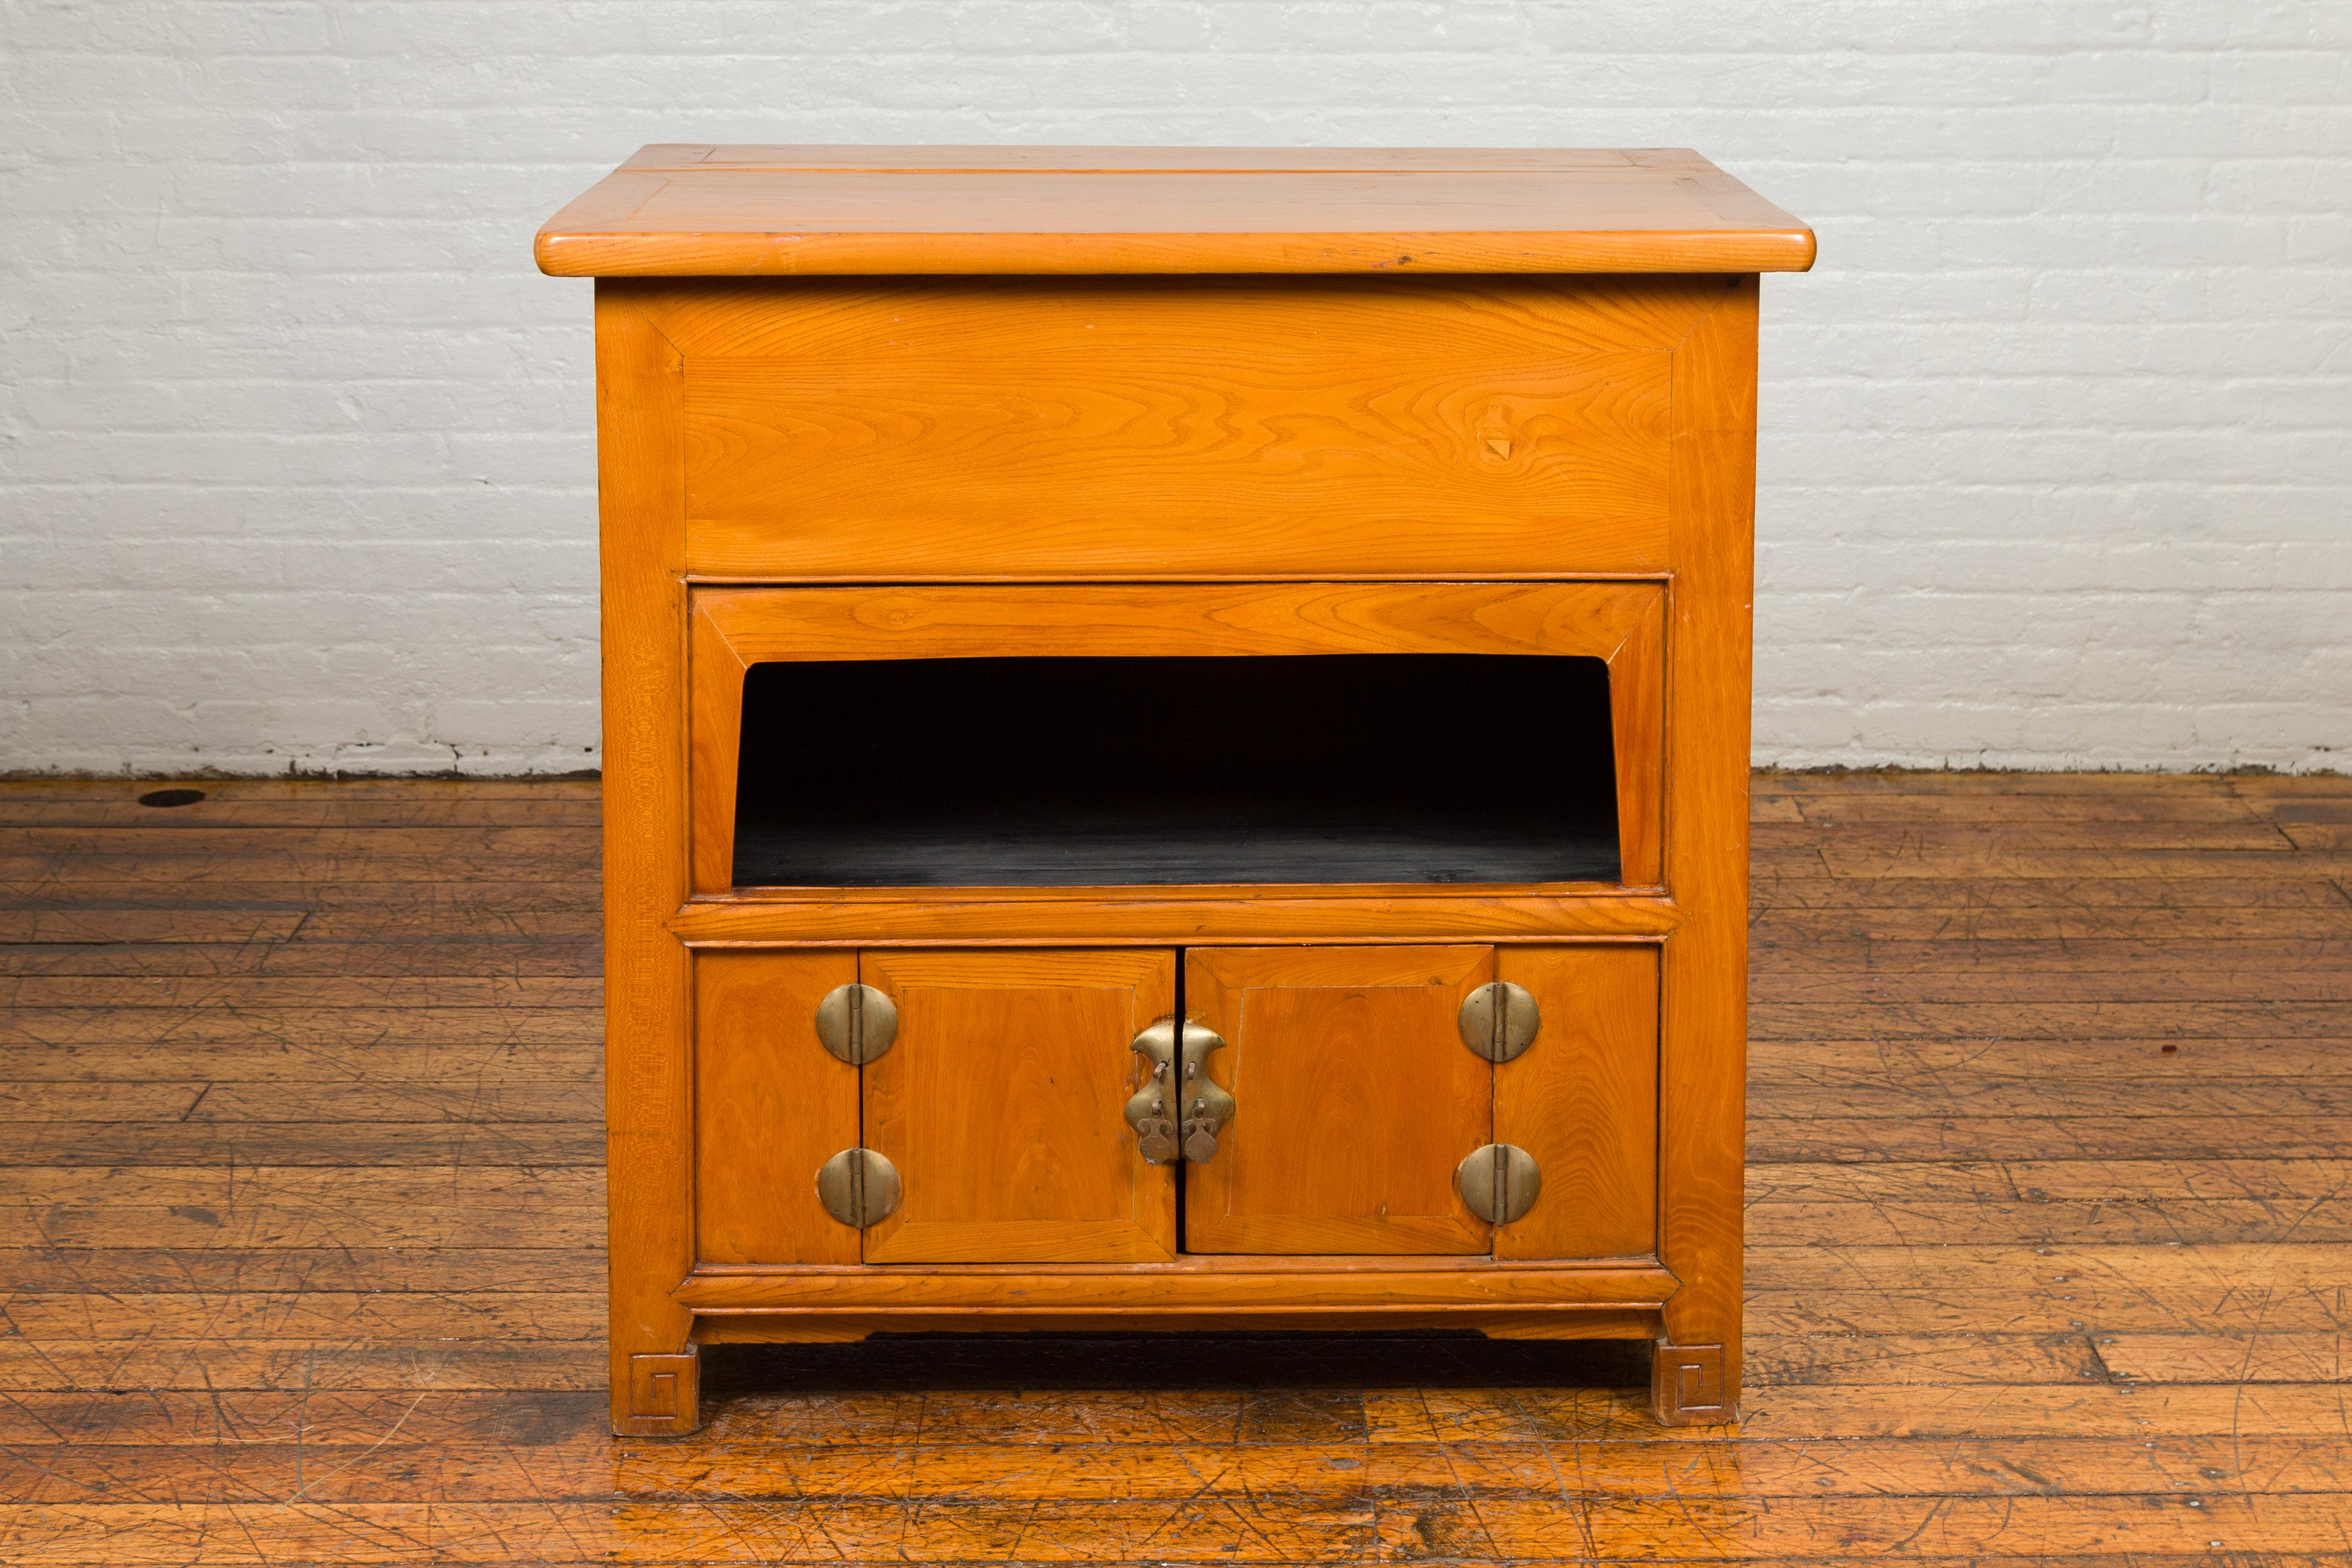 A Chinese vintage natural elmwood console cabinet from the mid-20th century, with removable top, open shelf, double doors and bronze hardware. Crafted in China during the midcentury period, this elm cabinet features a two-part rectangular top whose